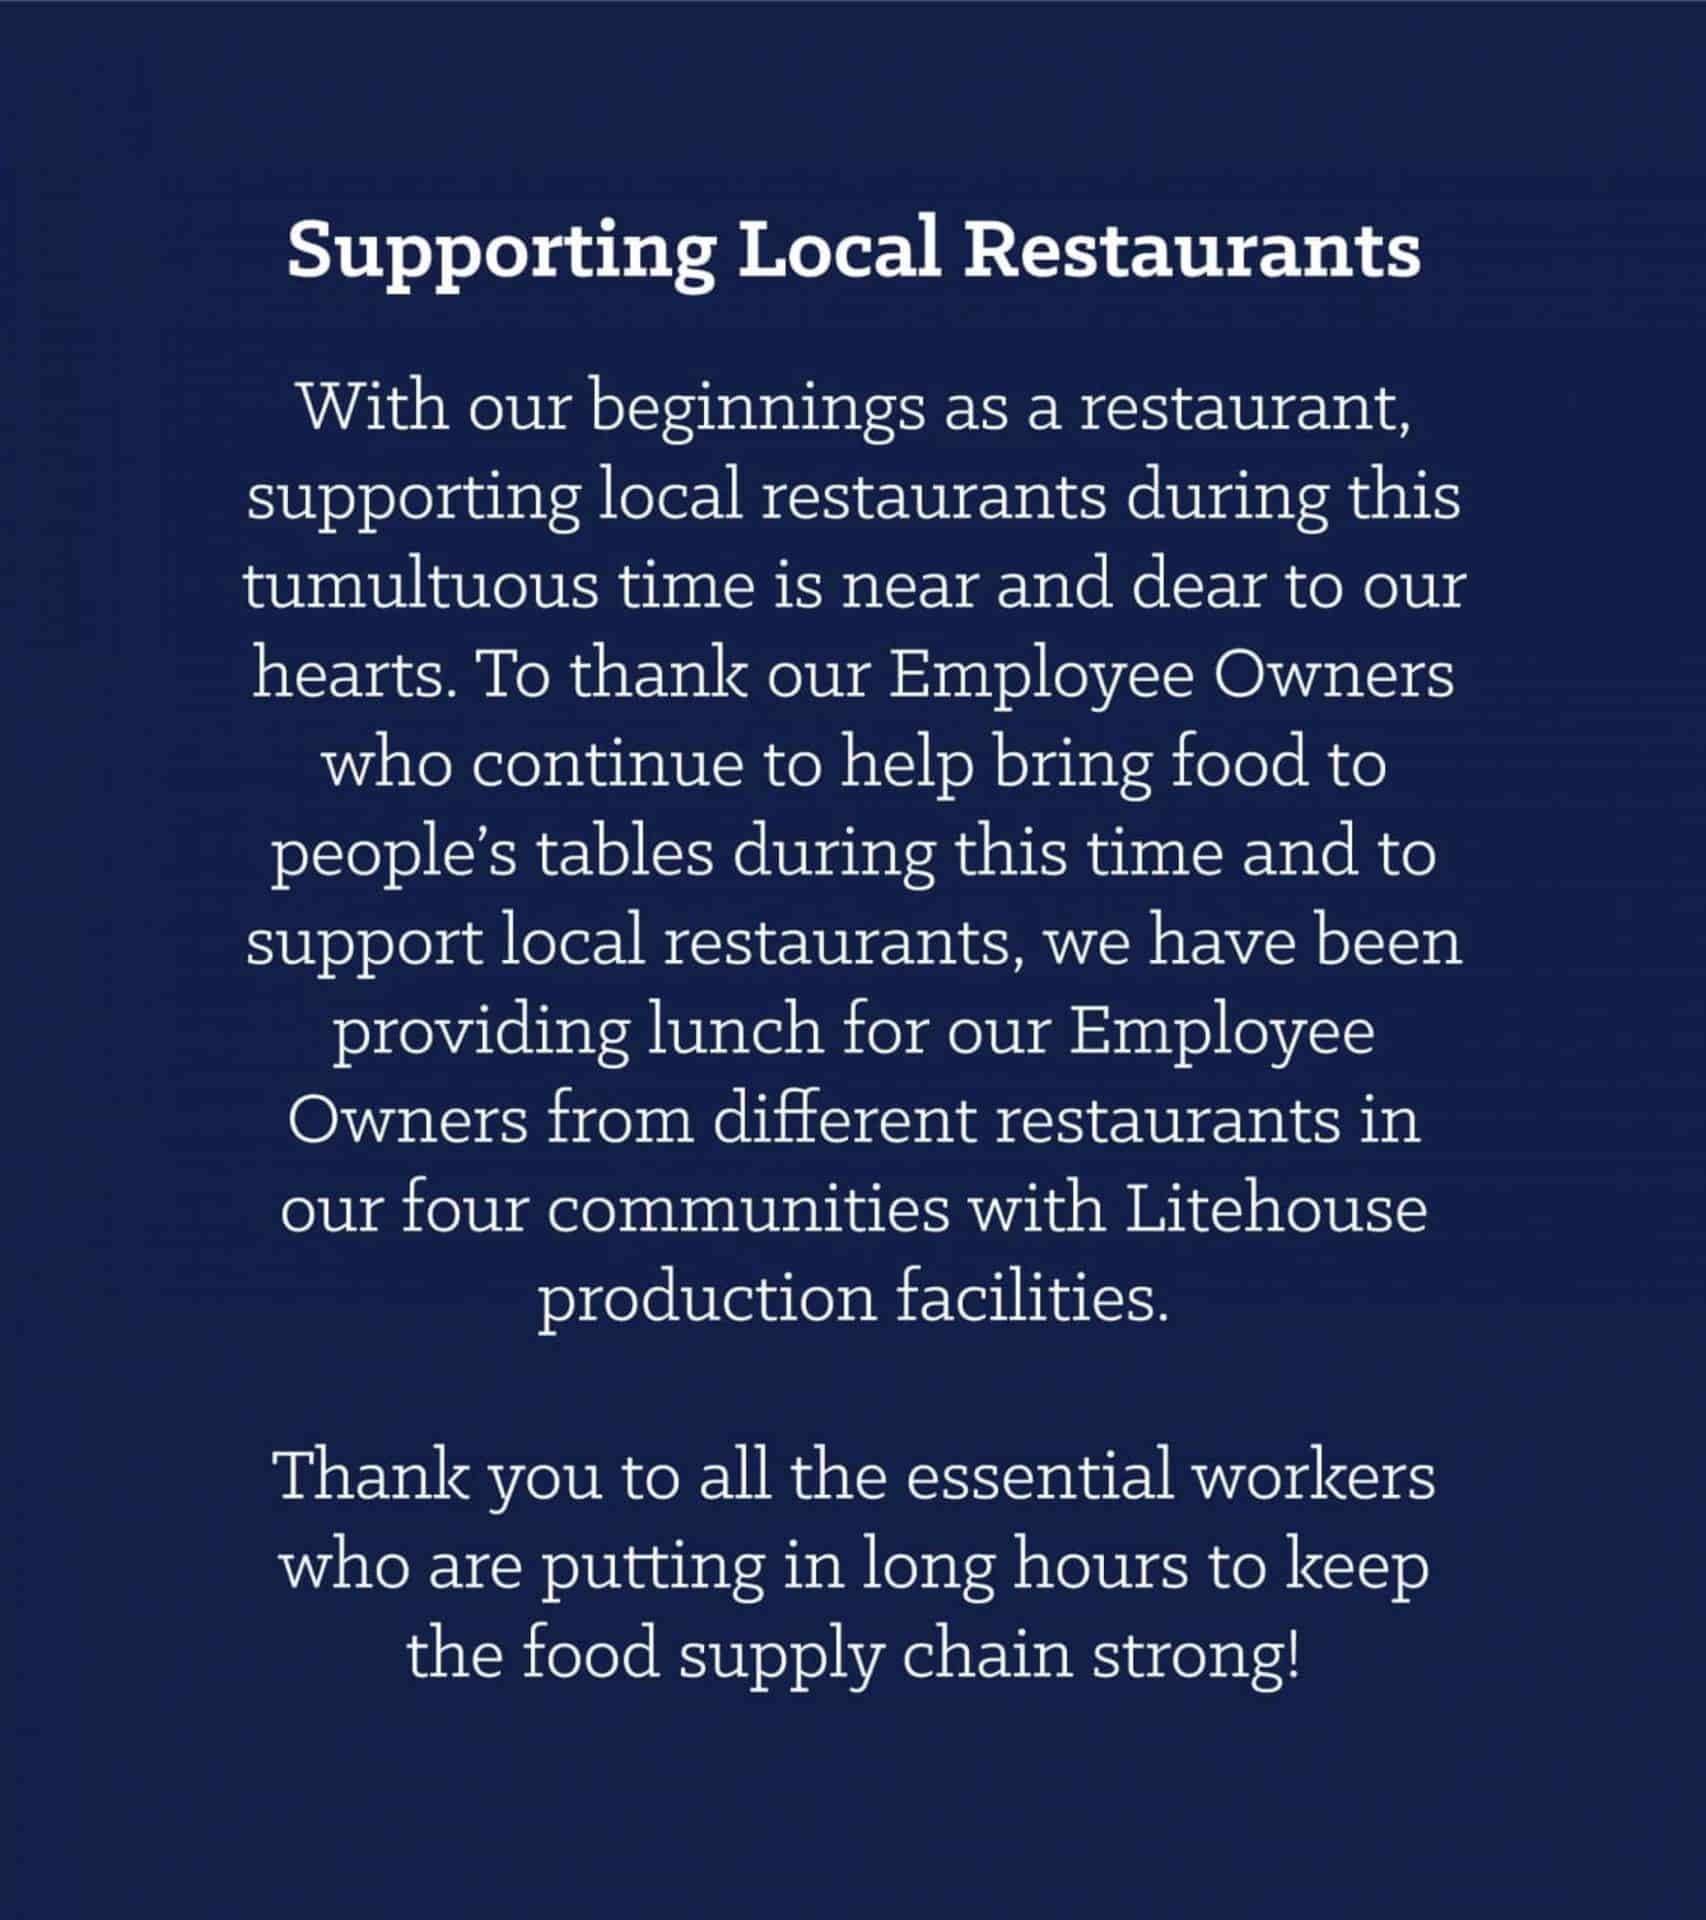 Supporting Local Restaurants